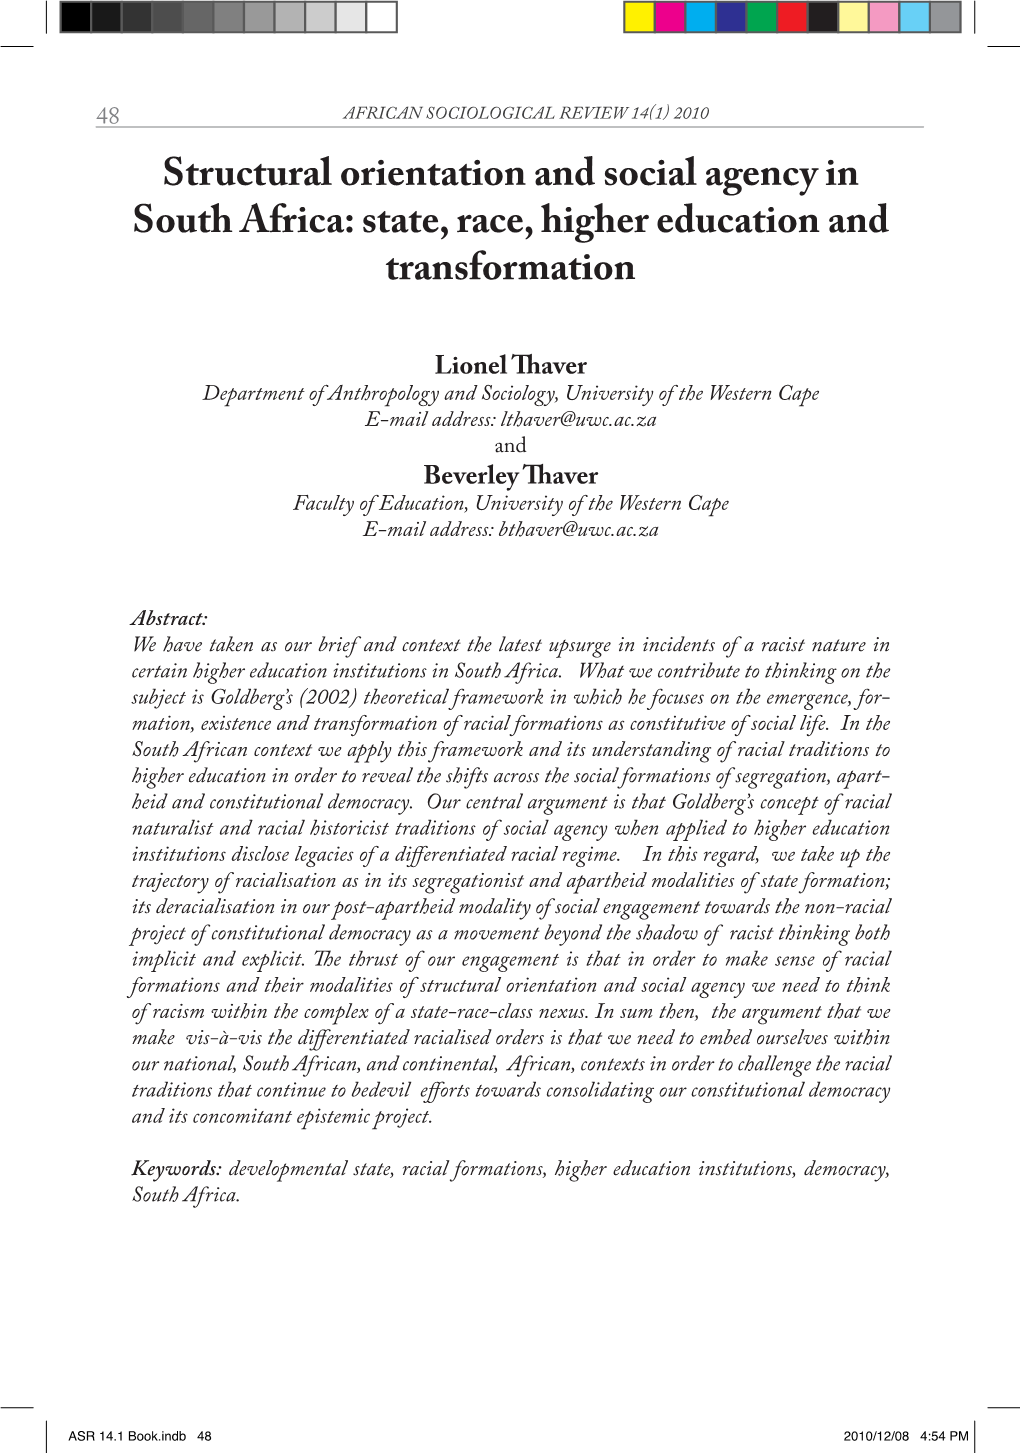 Structural Orientation and Social Agency in South Africa: State, Race, Higher Education and Transformation